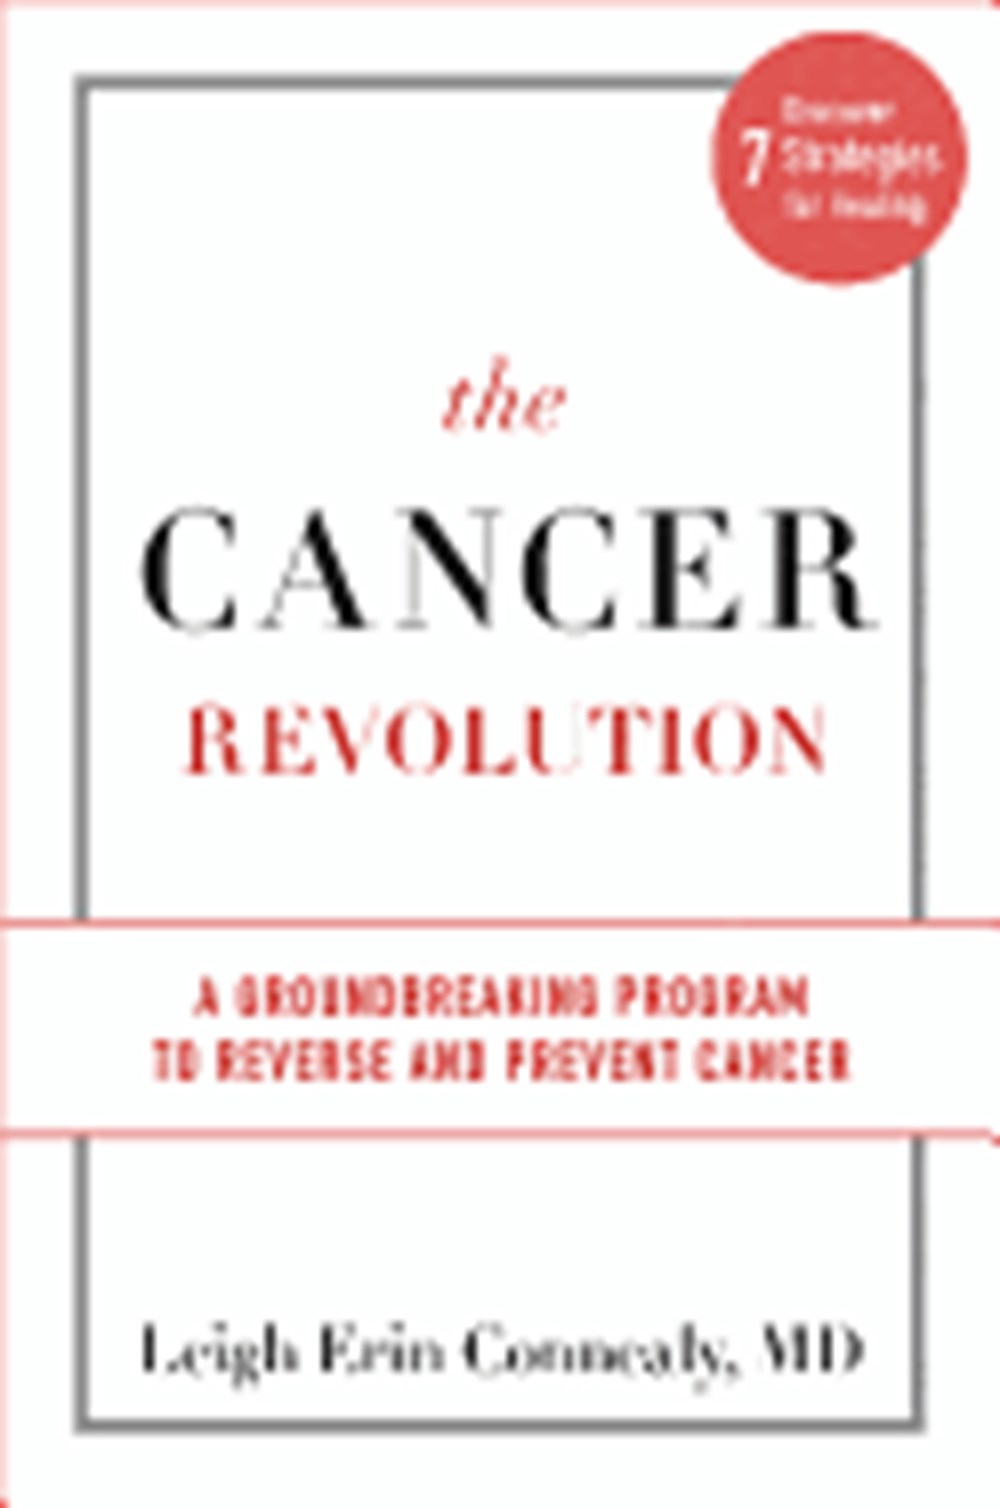 Cancer Revolution: A Groundbreaking Program to Reverse and Prevent Cancer